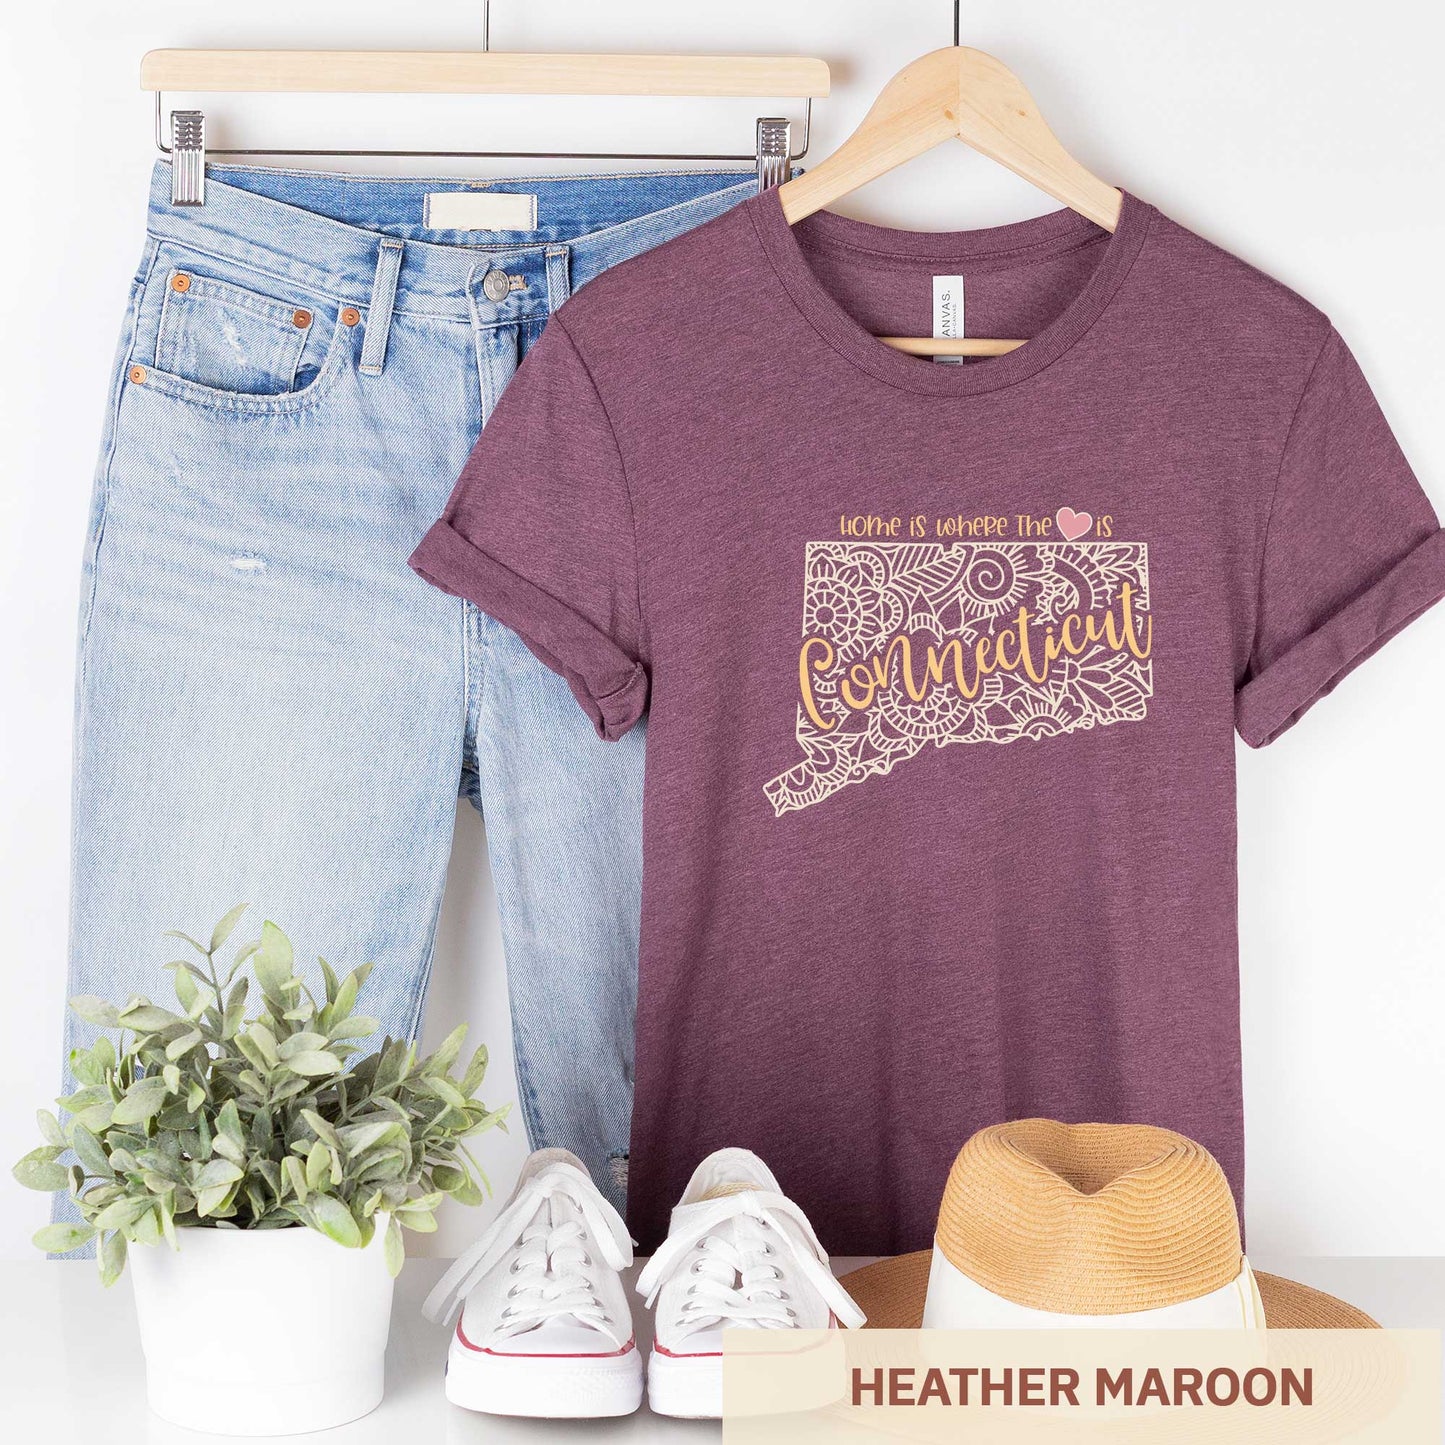 A hanging heather maroon Bella Canvas t-shirt featuring a mandala in the shape of Connecticut with the words home is where the heart is.